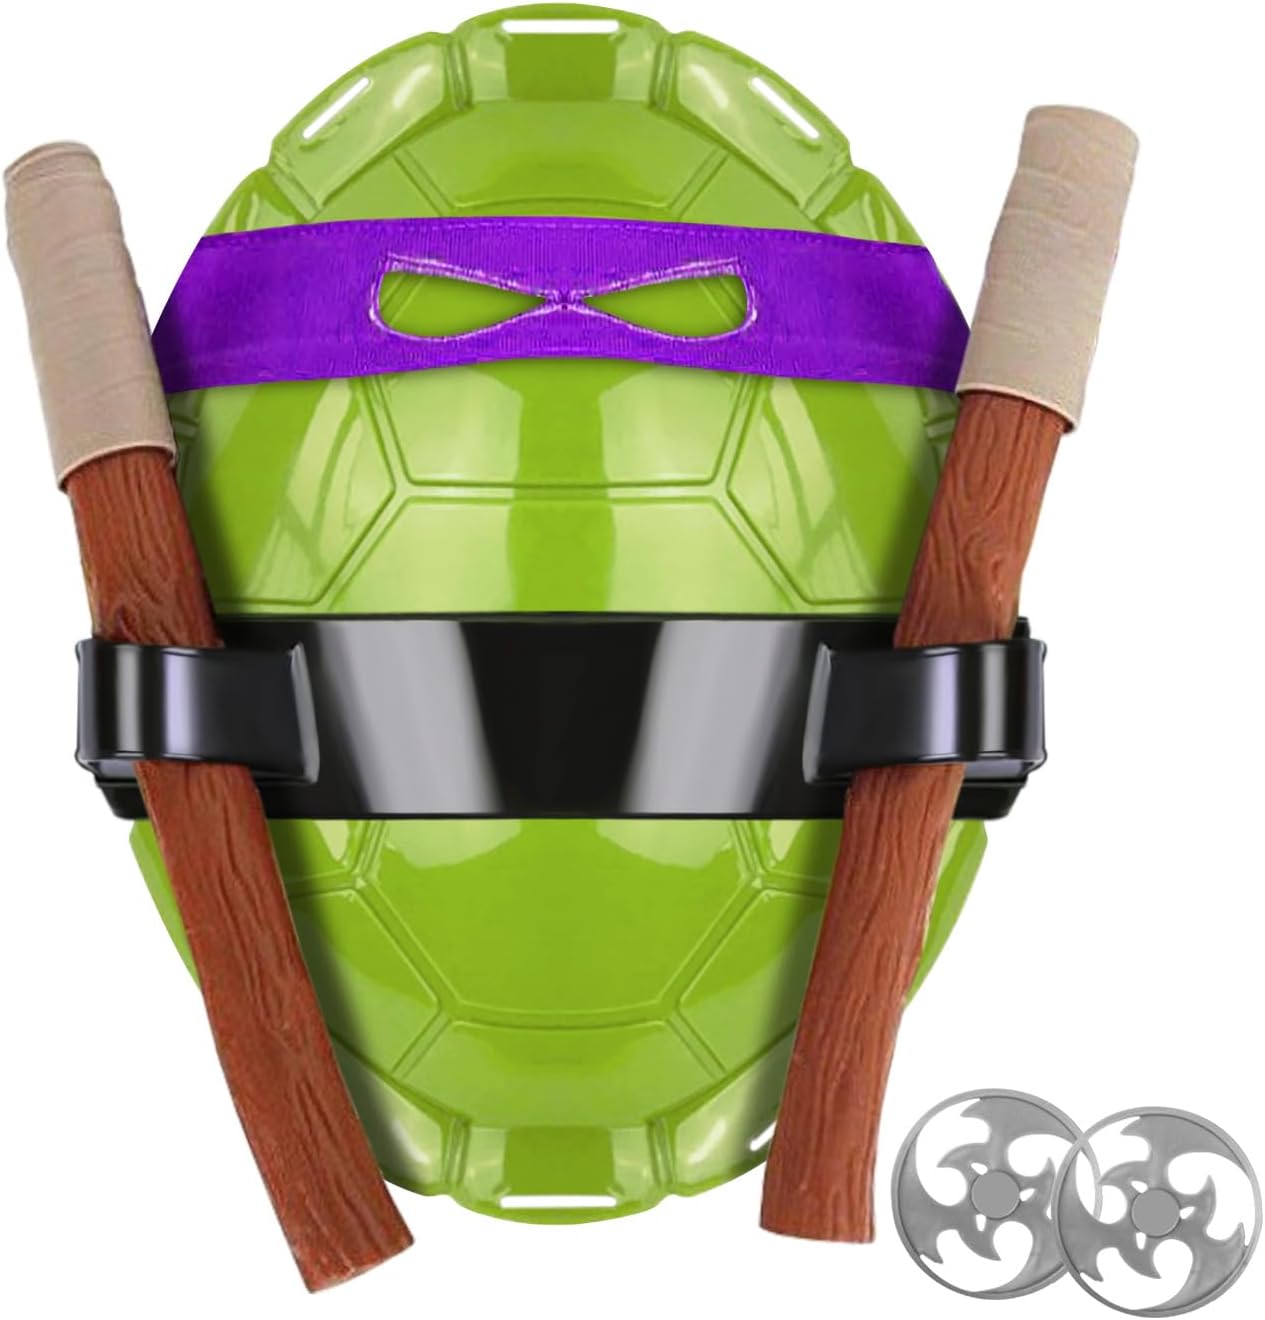 Watstend SuperHero Cosplay Costume for Kids Turtle Shell Blindfold Mask Halloween Stage Cosplay Anime Role Playing